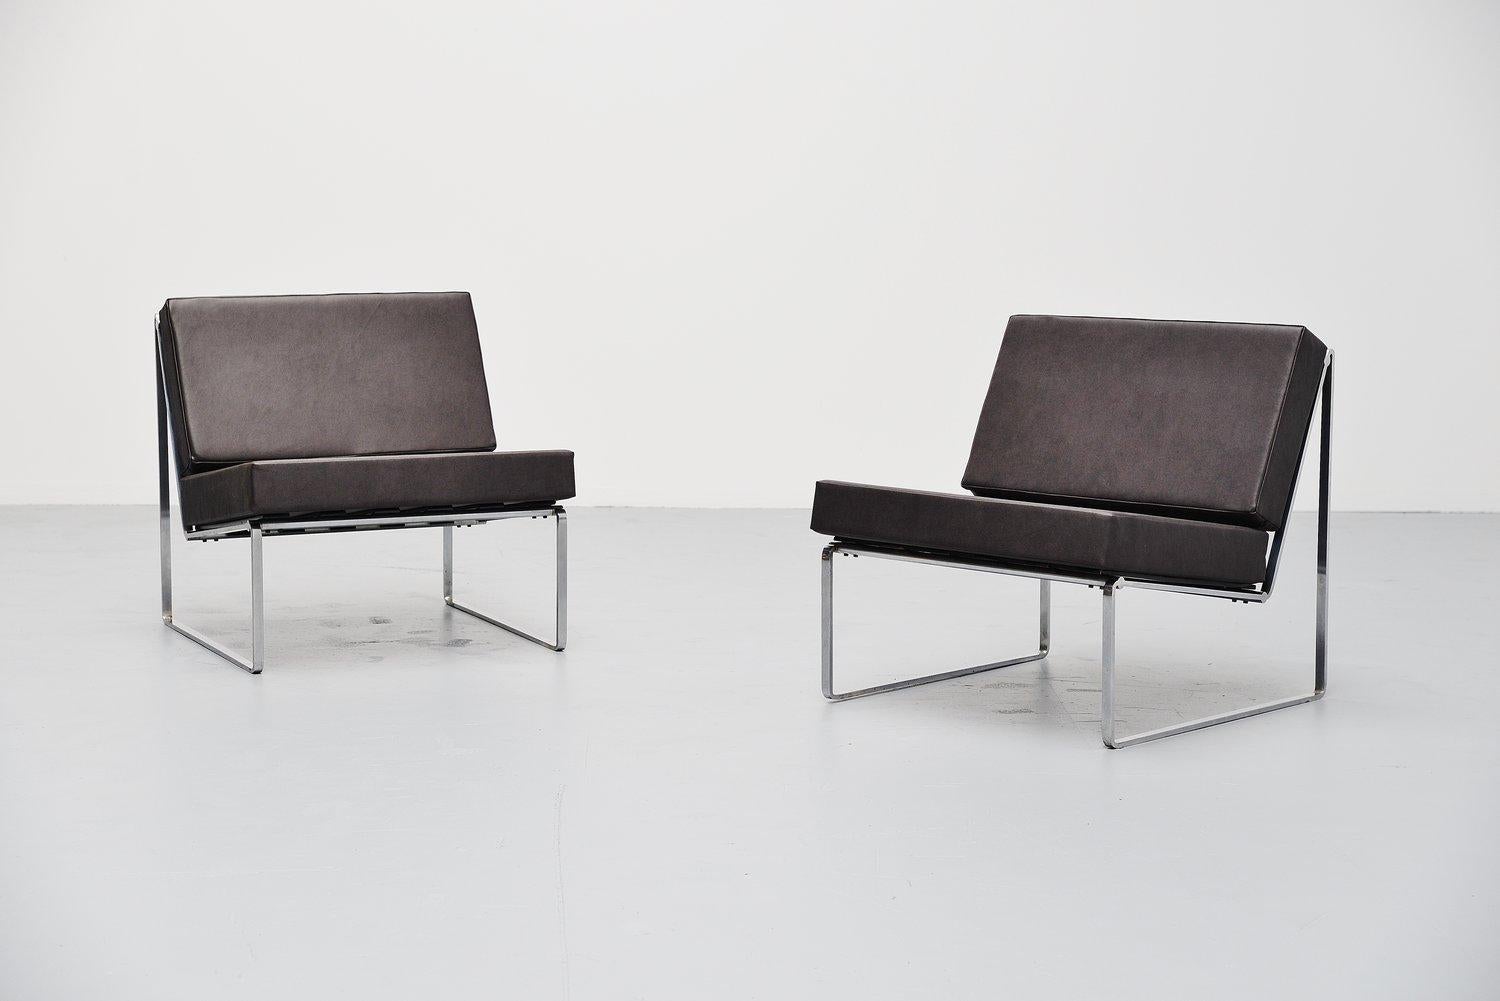 Comfortable pair of modernist lounge chairs model 024 designed by Kho Liang Ie for Artifort, Holland, 1962. These chairs have a solid metal, matt chrome plated frame. With black lacquered wooden slats, finished with faux leather cushions. The chairs